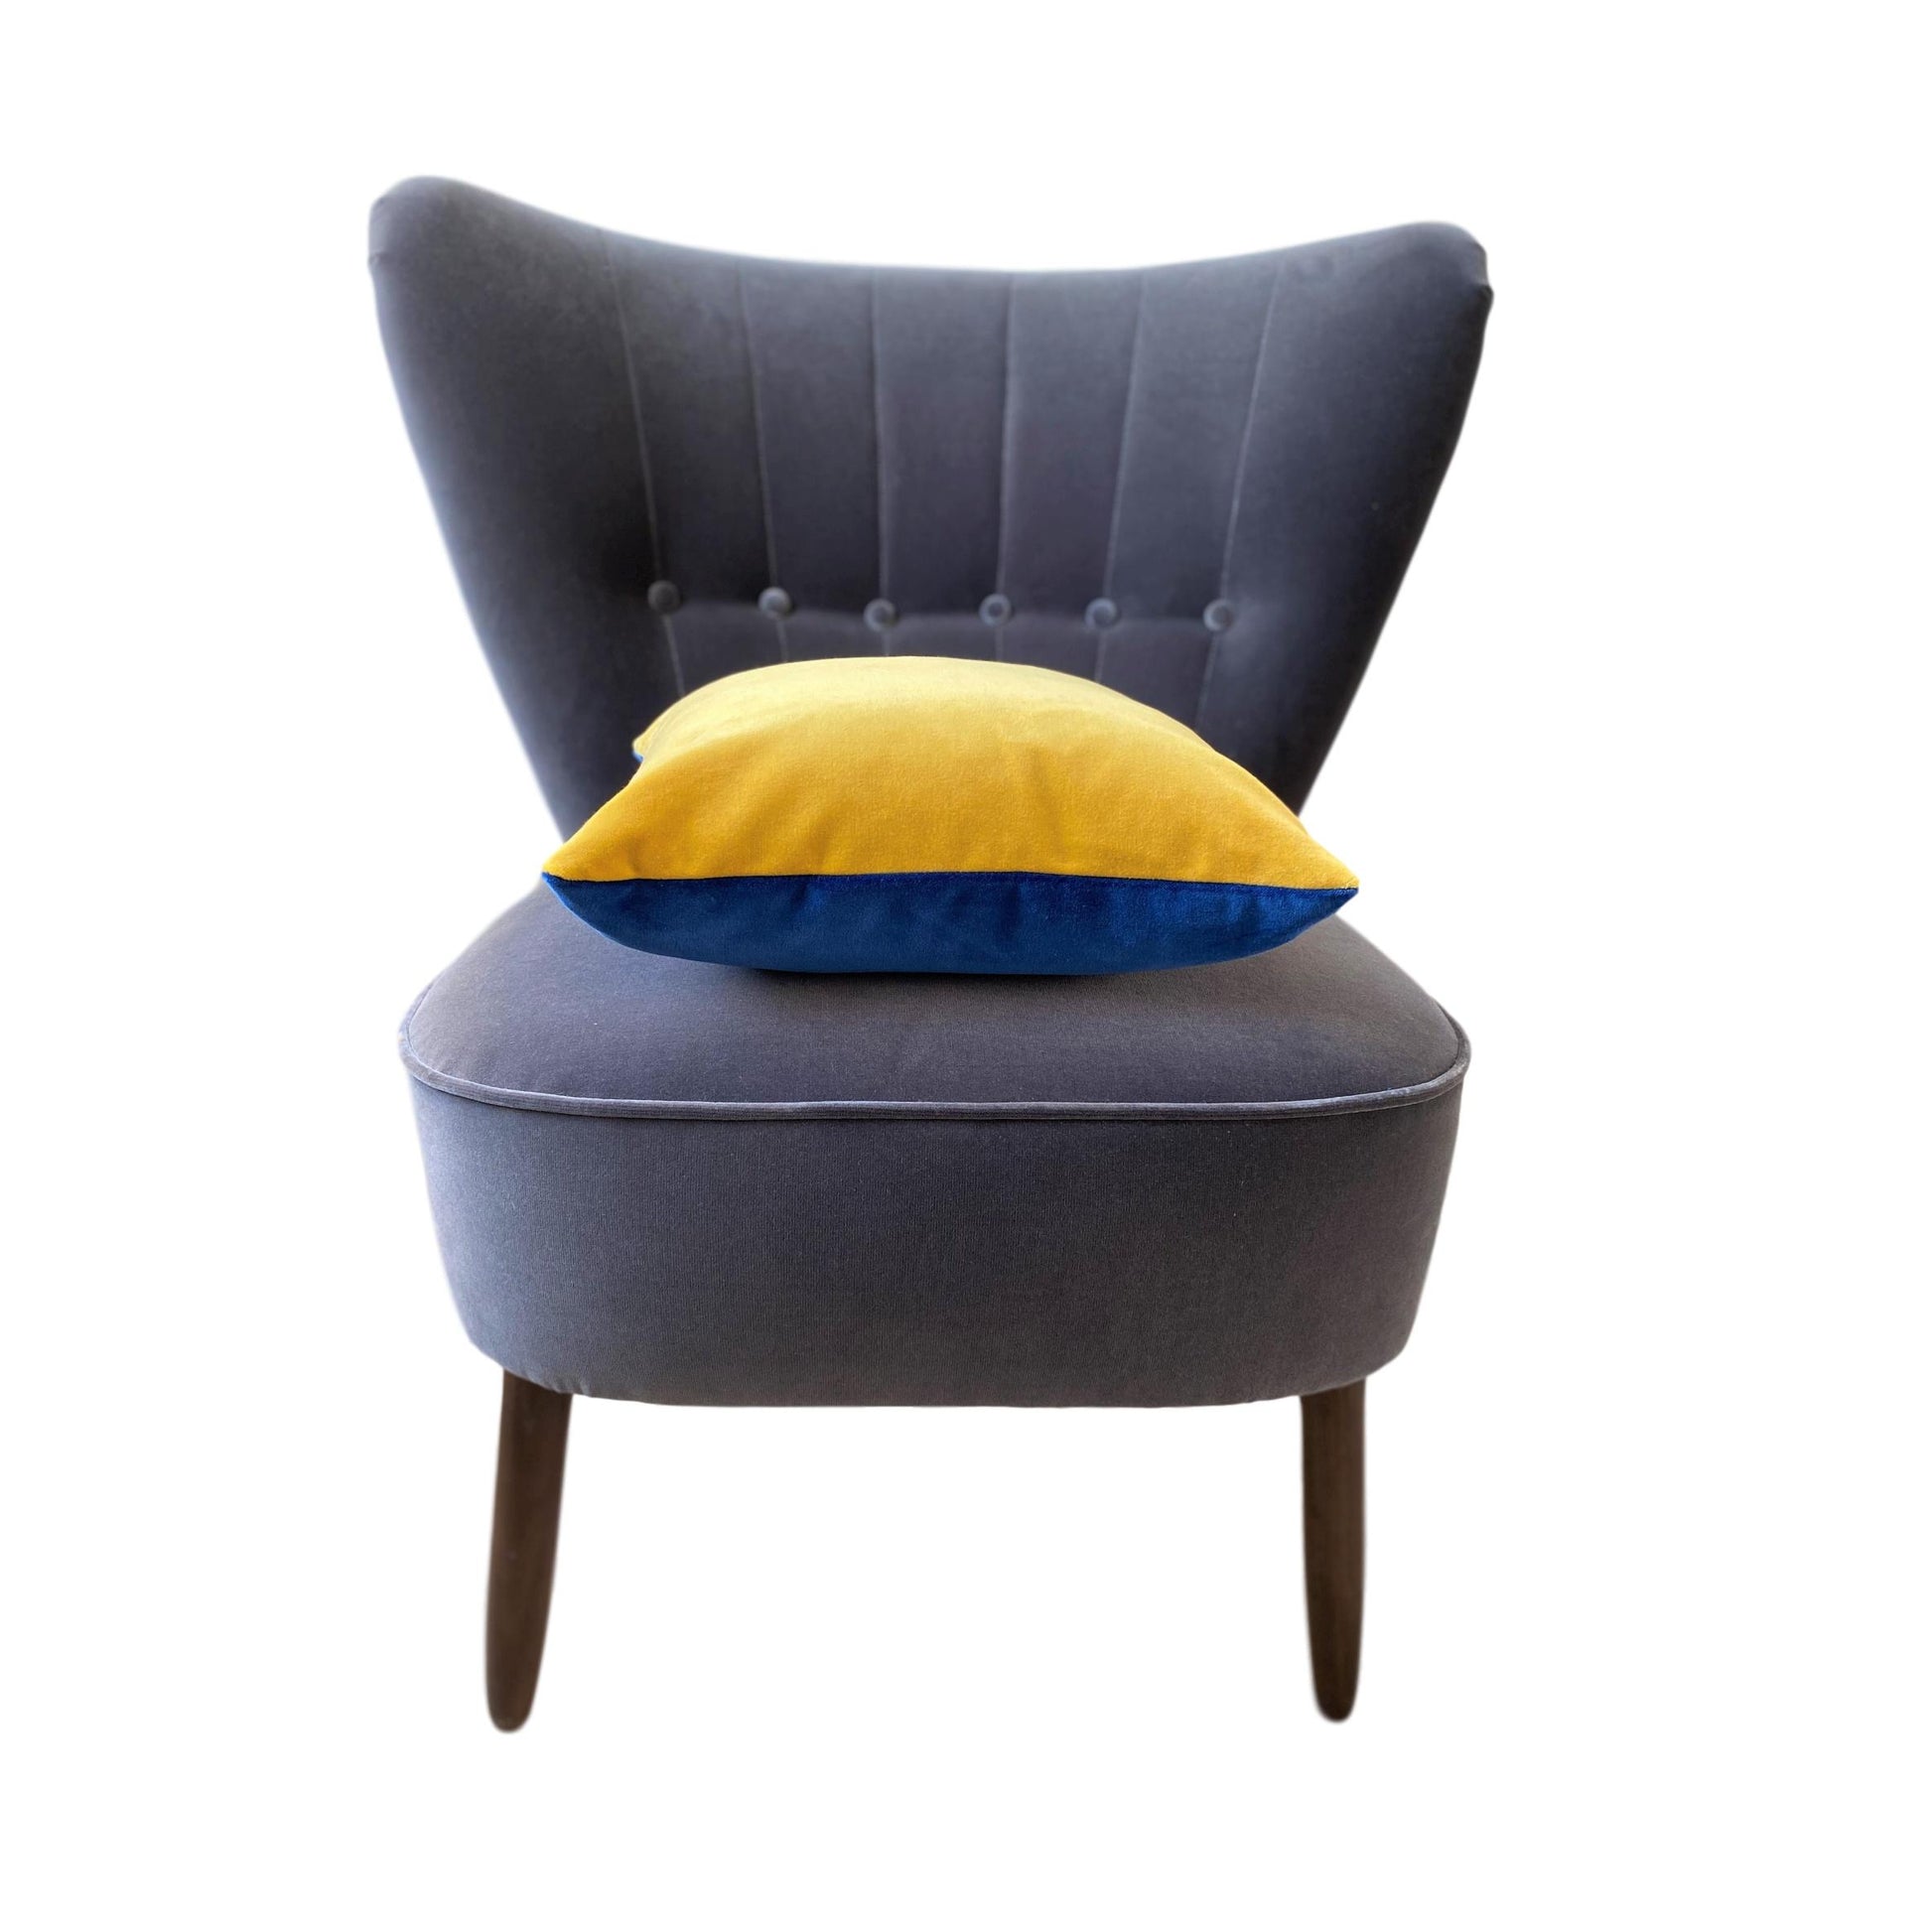 Blue and gold cushion by luxe 39